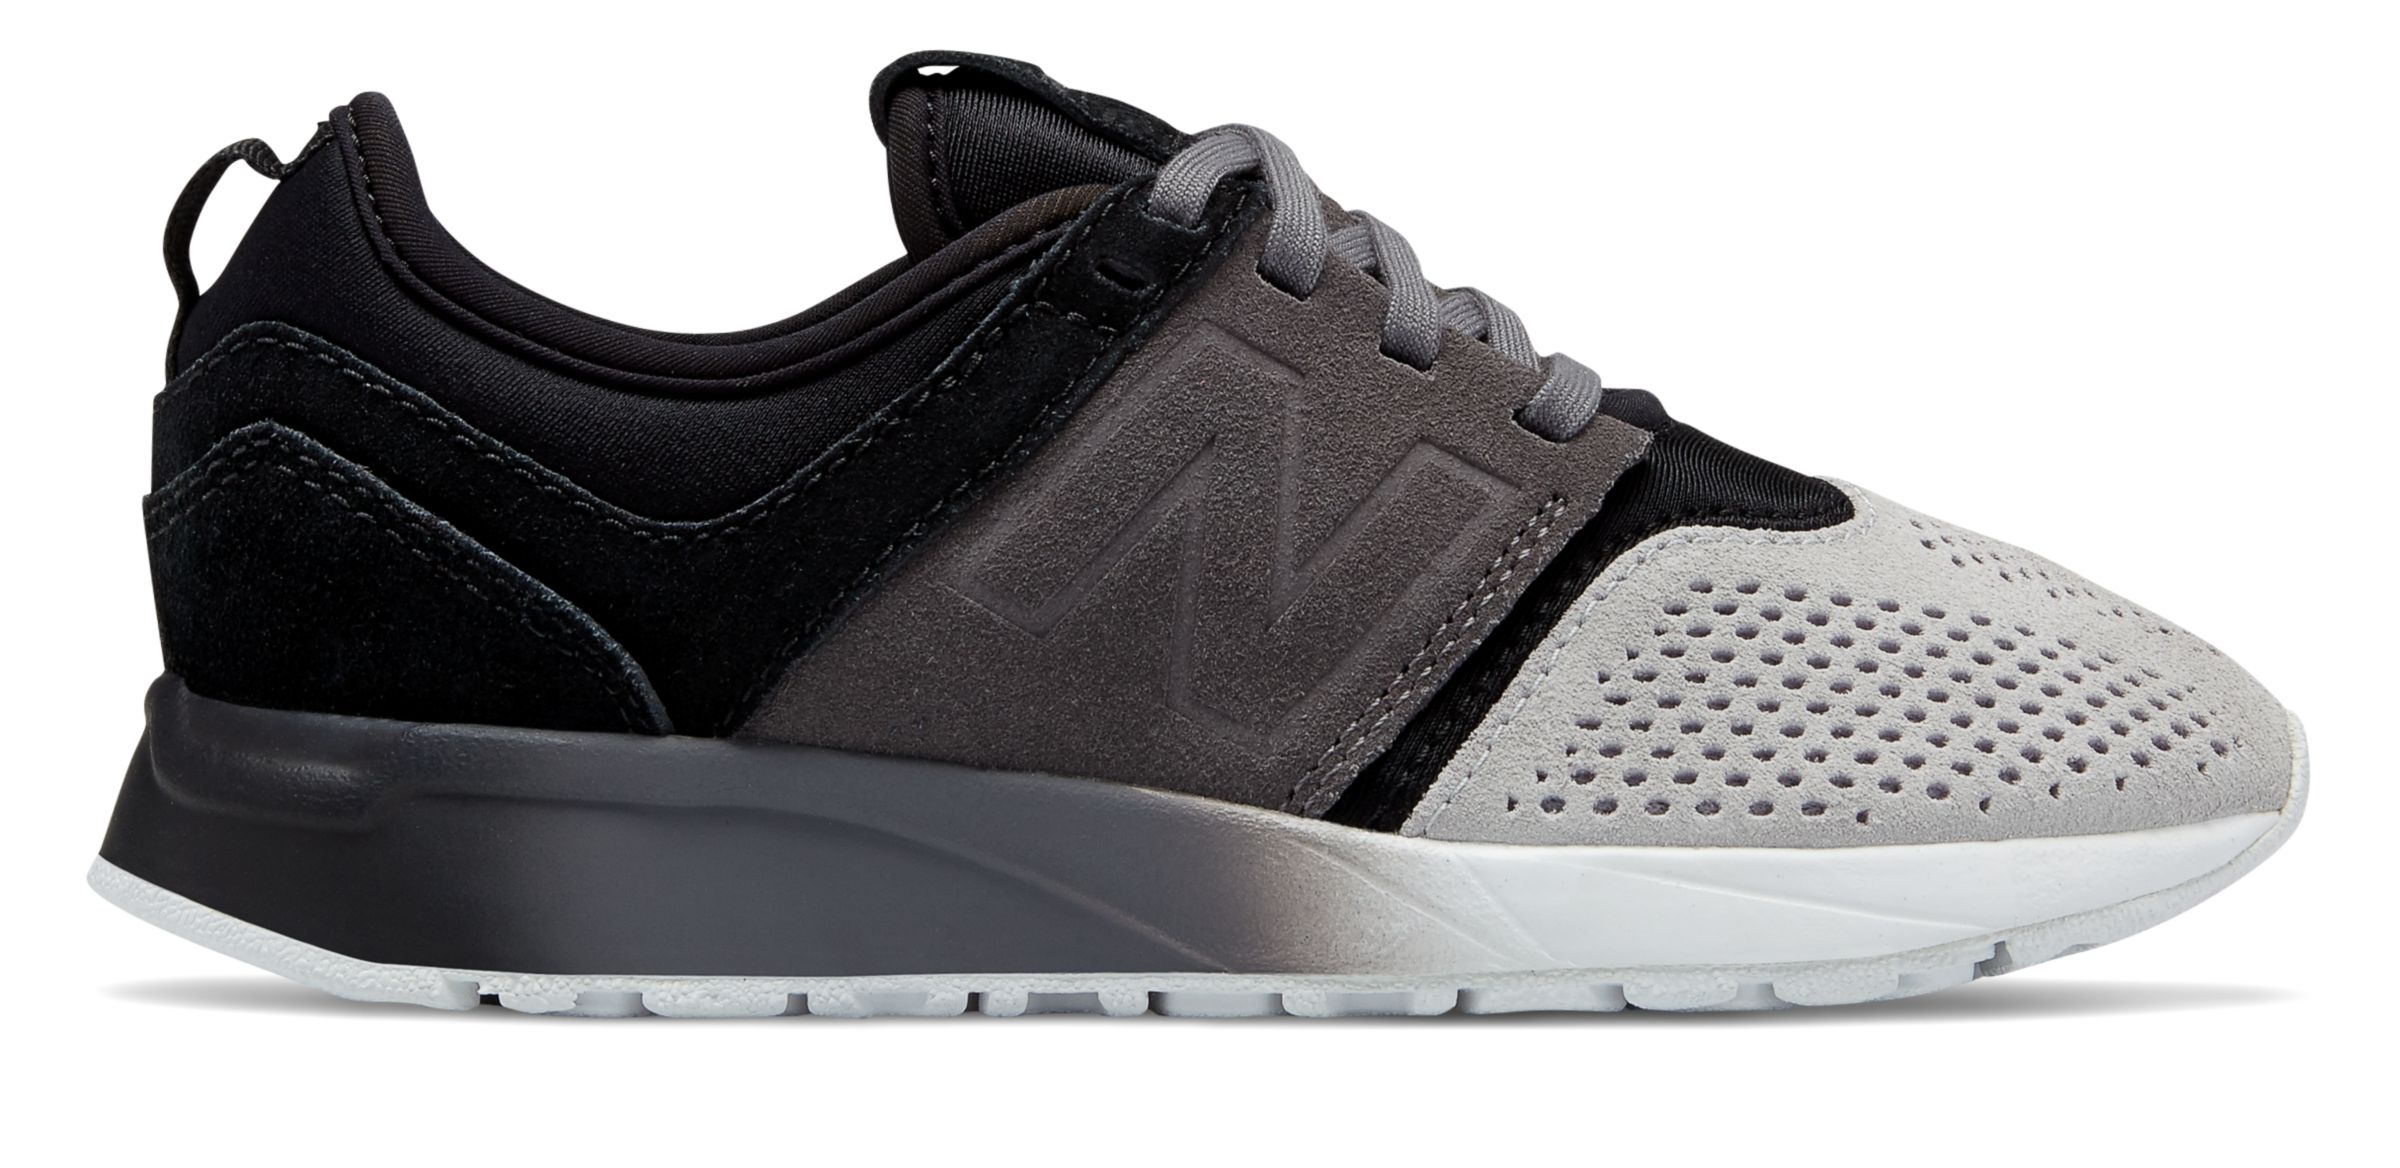 The 247 - New Sneaker Releases - New Balance